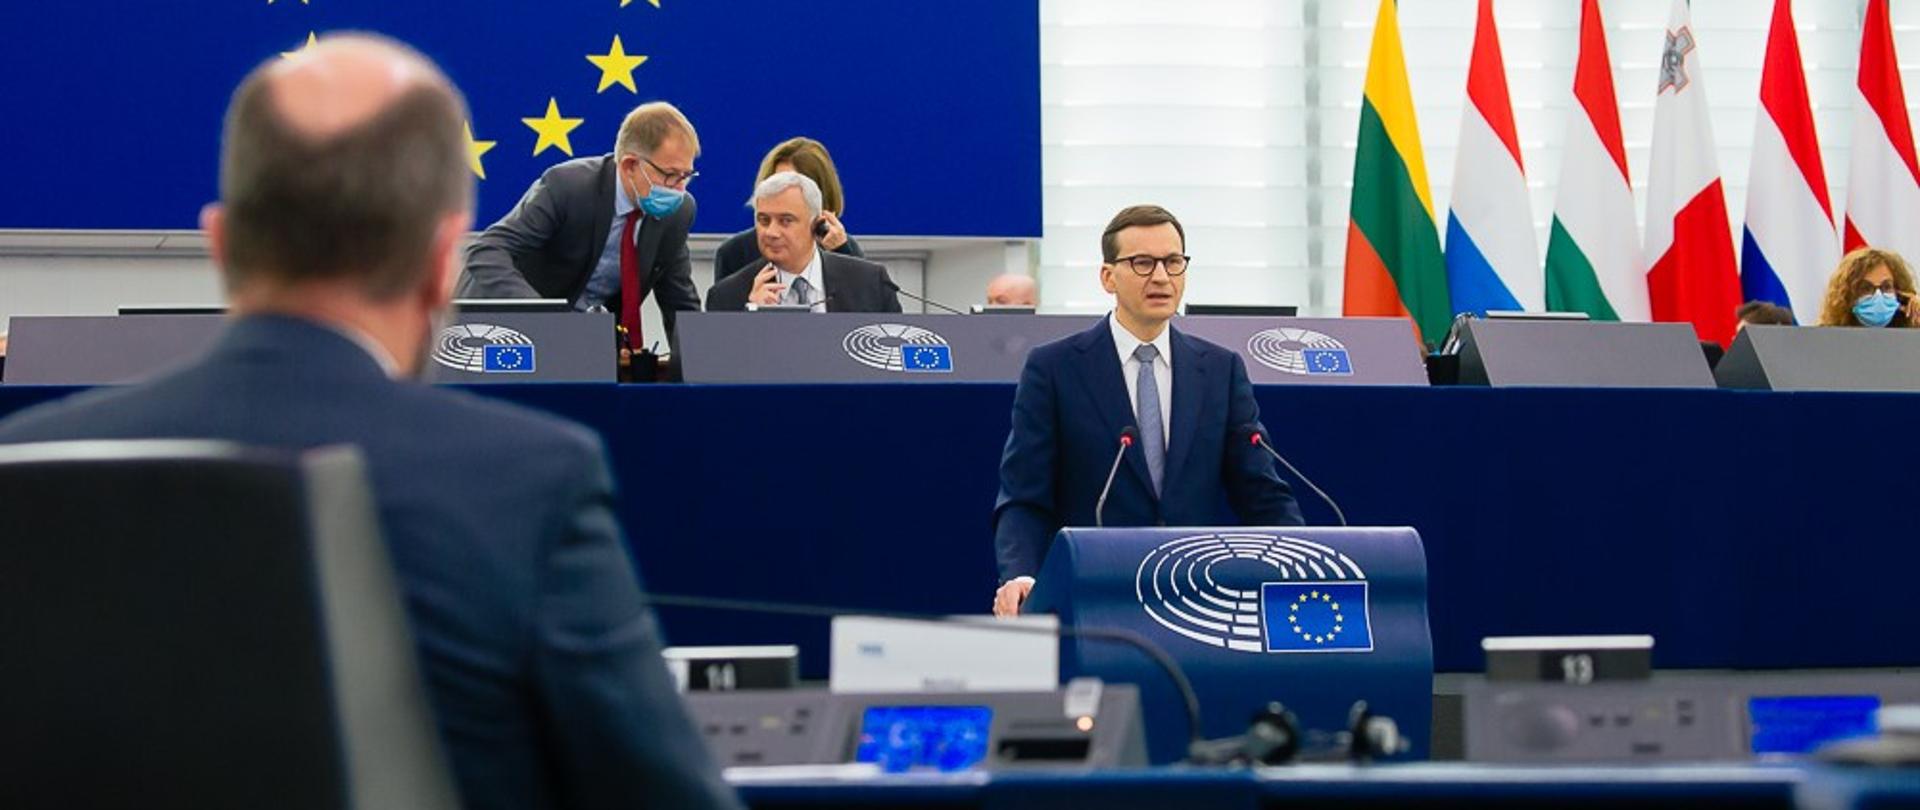 Statement by Prime Minister Mateusz Morawiecki in the European Parliament.